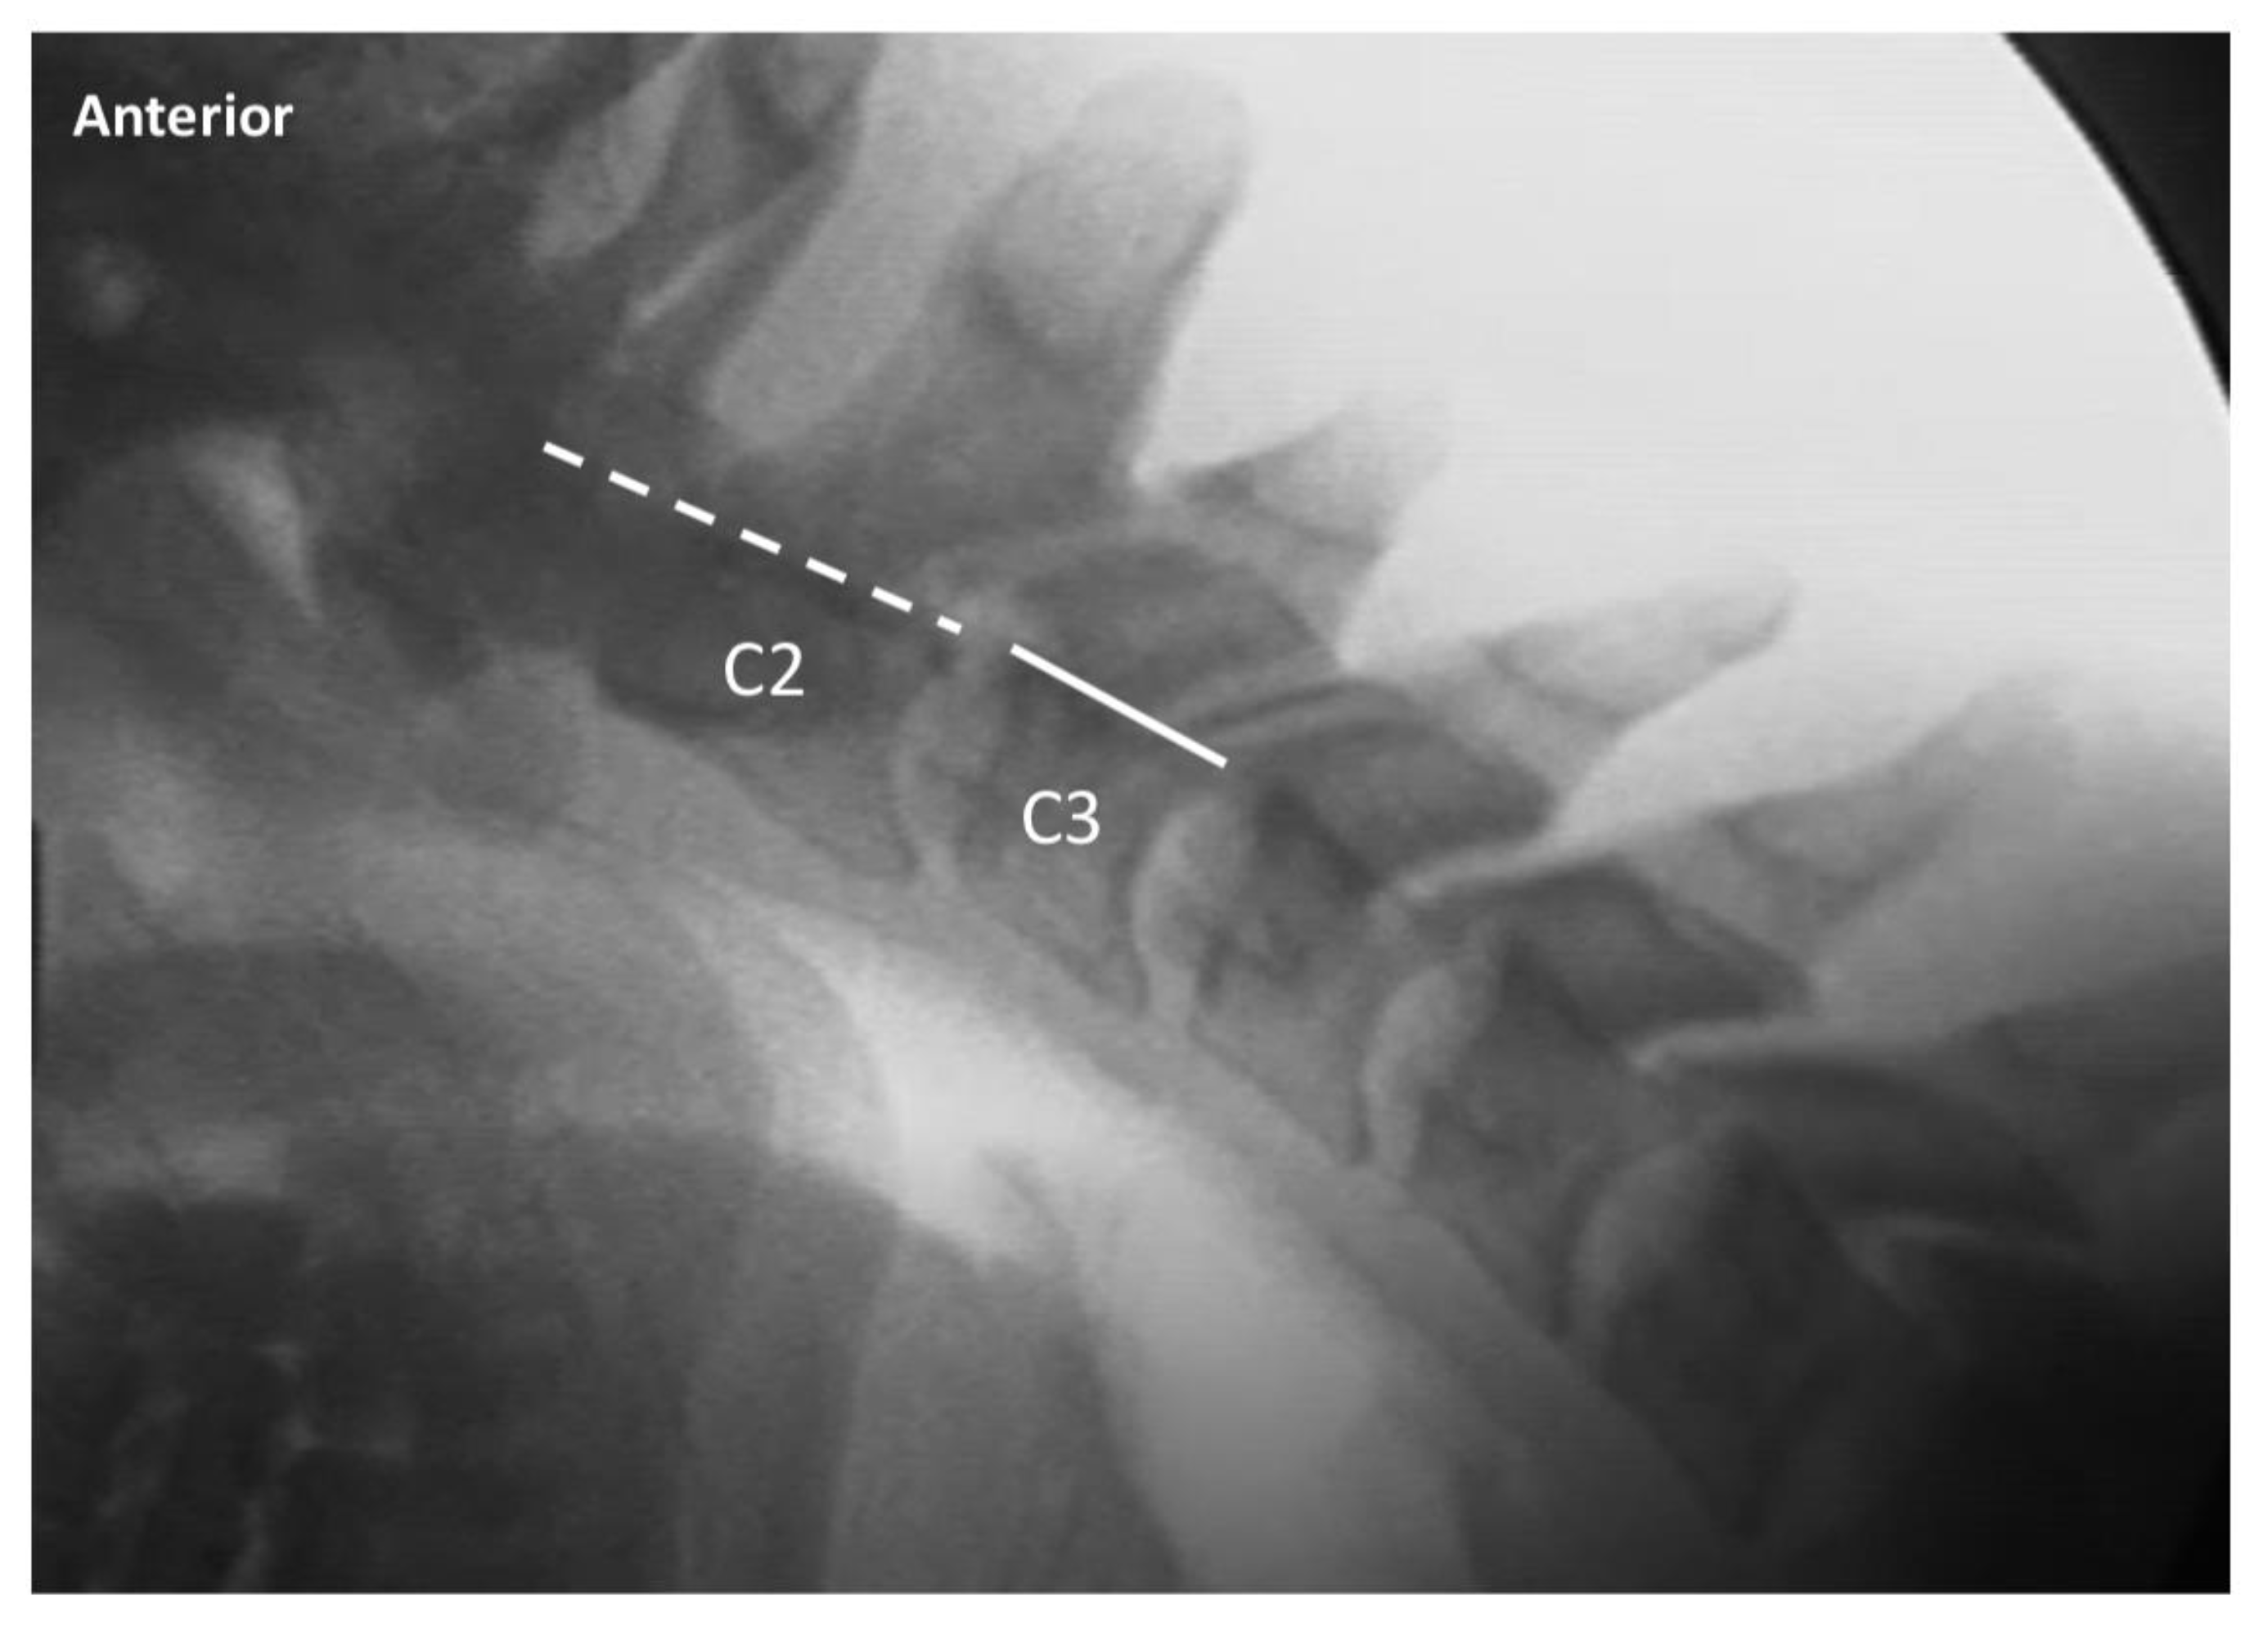 Diagnostic Accuracy of Videofluoroscopy for Symptomatic Cervical Spine Injury Following Whiplash Trauma